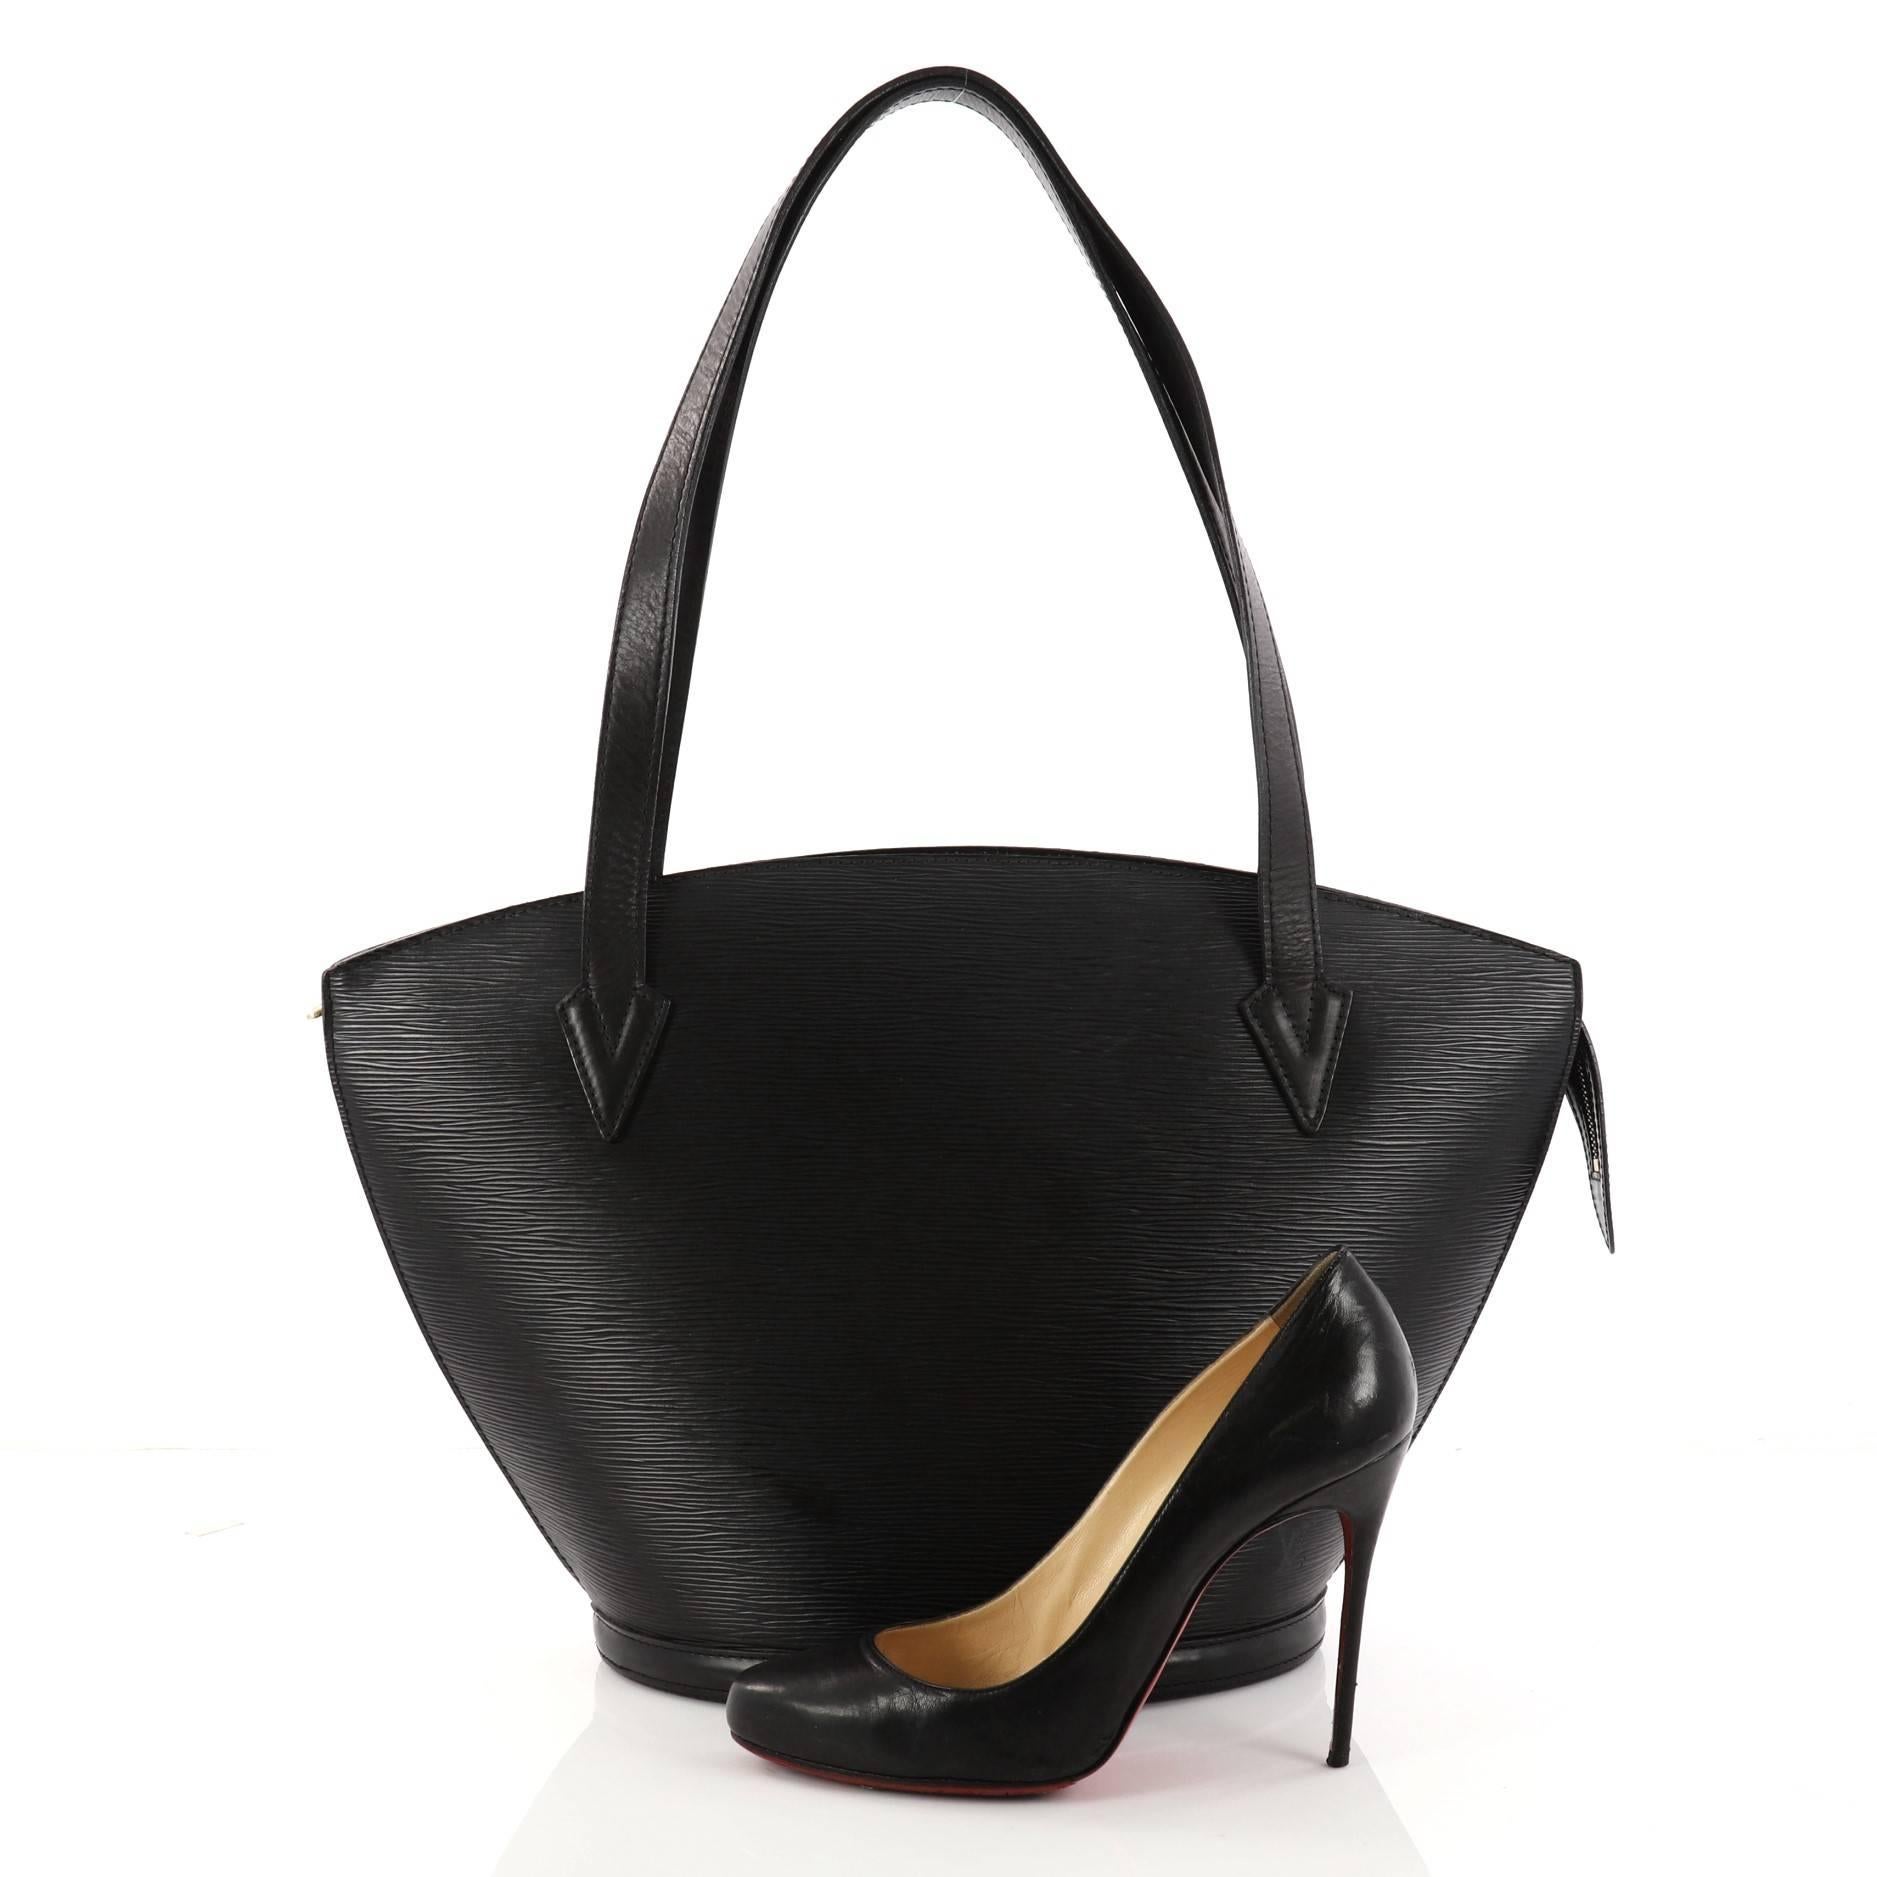 This authentic Louis Vuitton Saint Jacques Handbag Epi Leather GM is refined and elegant. Crafted from Louis Vuitton's signature sturdy black epi leather, this fan-shaped bag features dual flat leather straps, subtle LV logo at the front and a